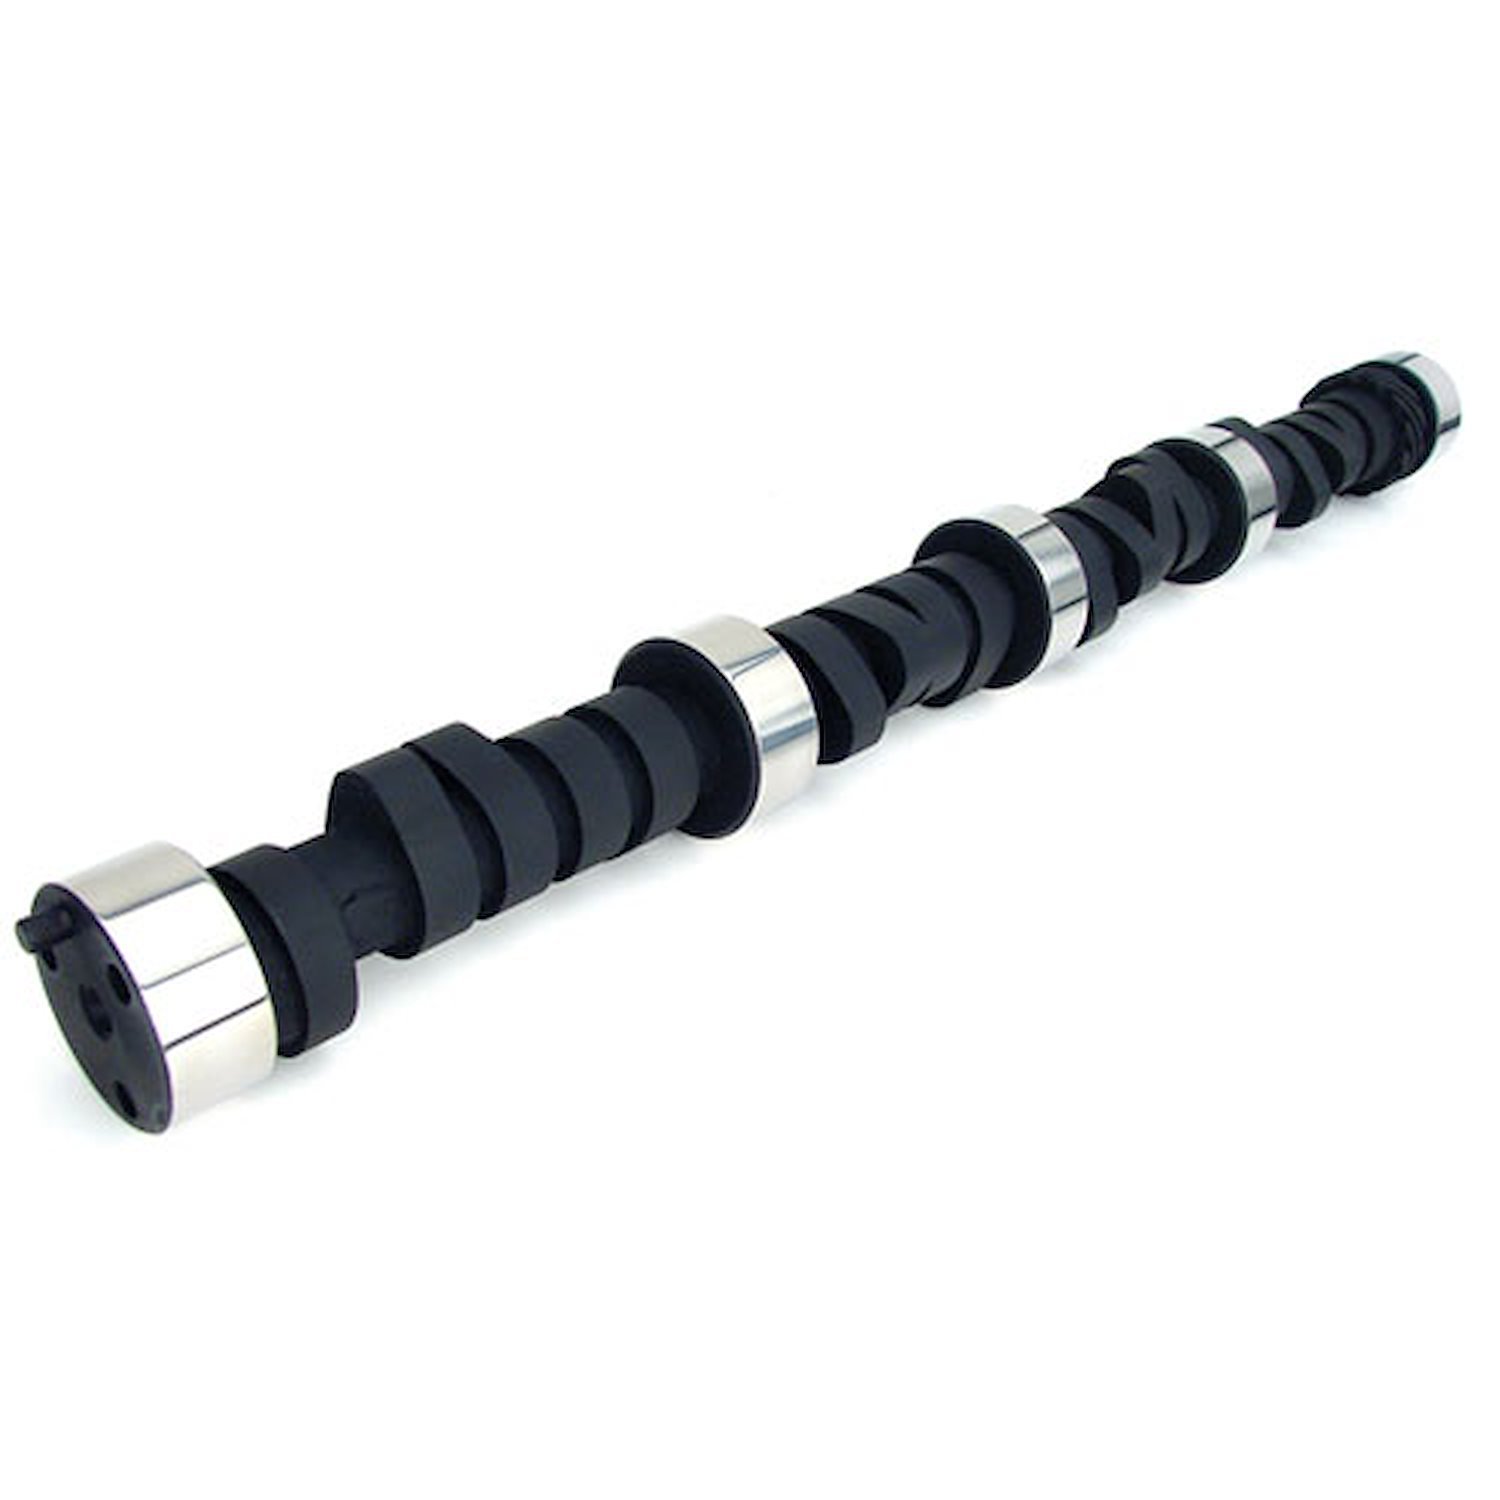 Xtreme Energy 274H Hydraulic Flat Tappet Camshaft Only Lift: .552" /.555" Duration: 274°/286° RPM Range: 1800-6000